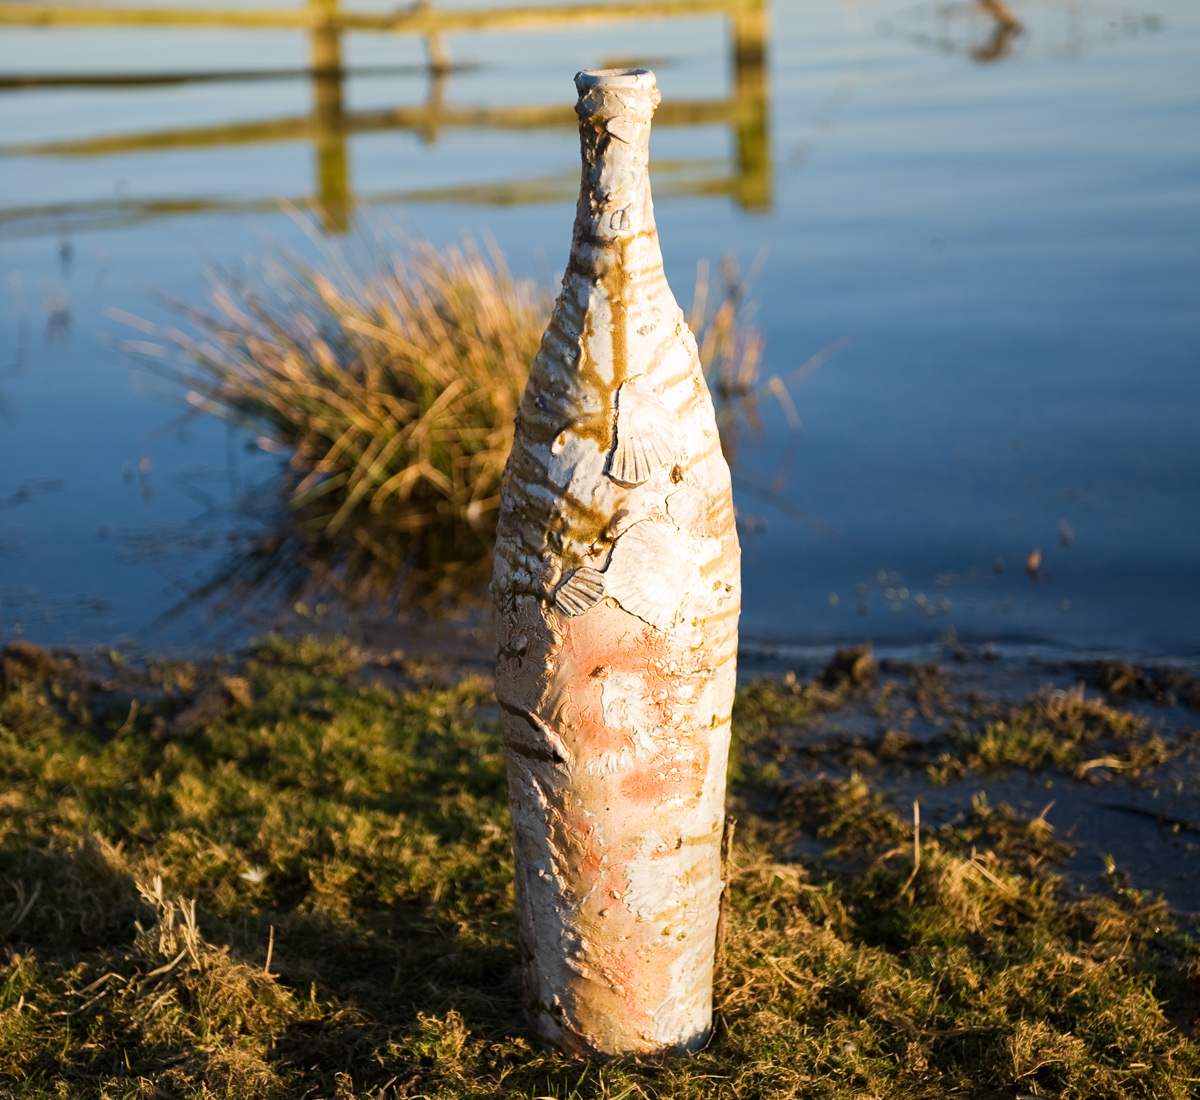 Nic Collins Tall Bottles Wood Fired Shells Featured Ceramics | Tall Wood-Fired Bottles by Nic Collins